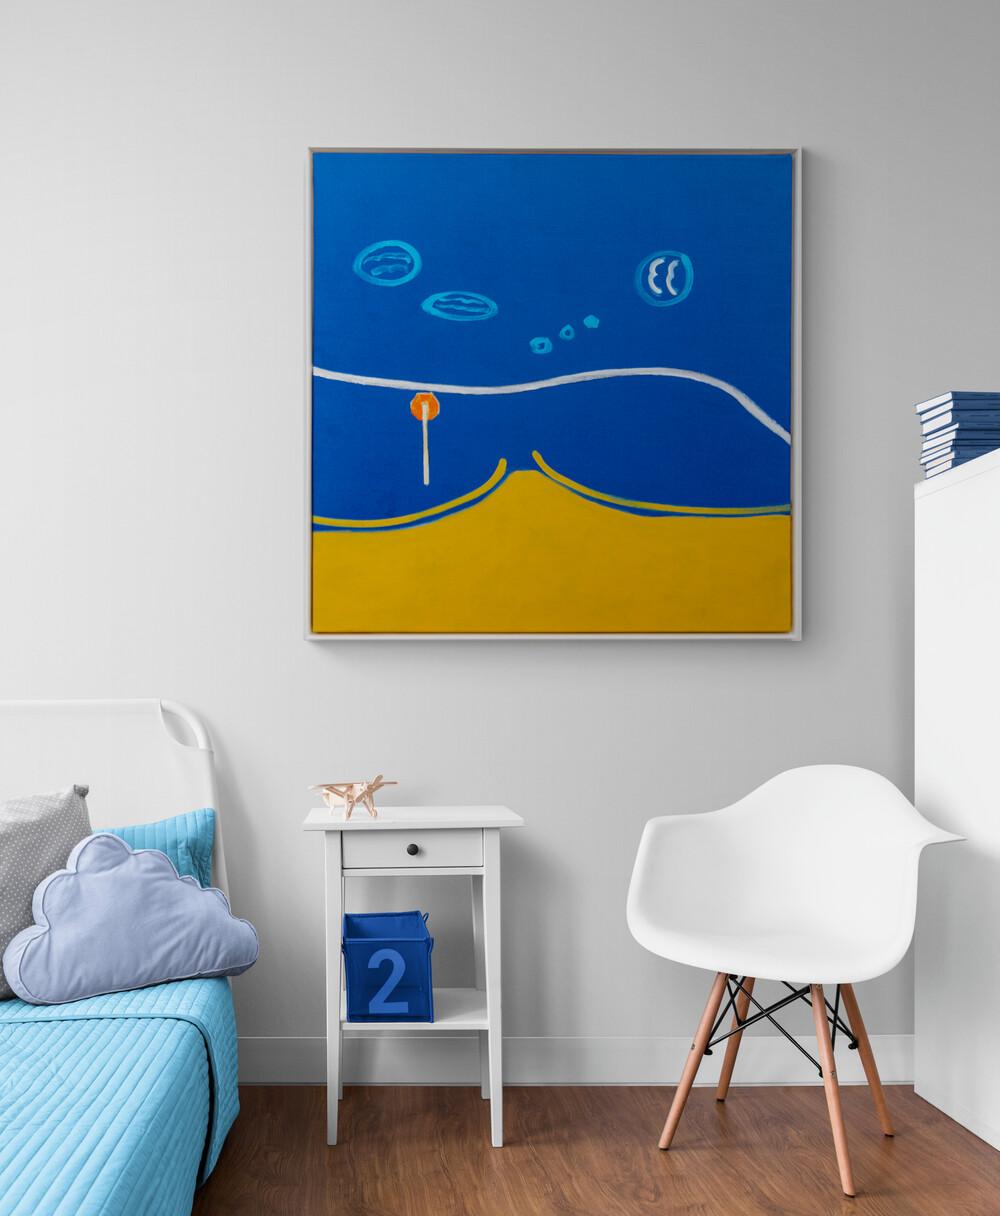 This intriguing minimalist composition by Pat Service was inspired by her love of road trips and is all about colour and clean, bold shapes. The canvas is saturated with a deep blue bordered by golden yellow and divided by a curvy white line--the